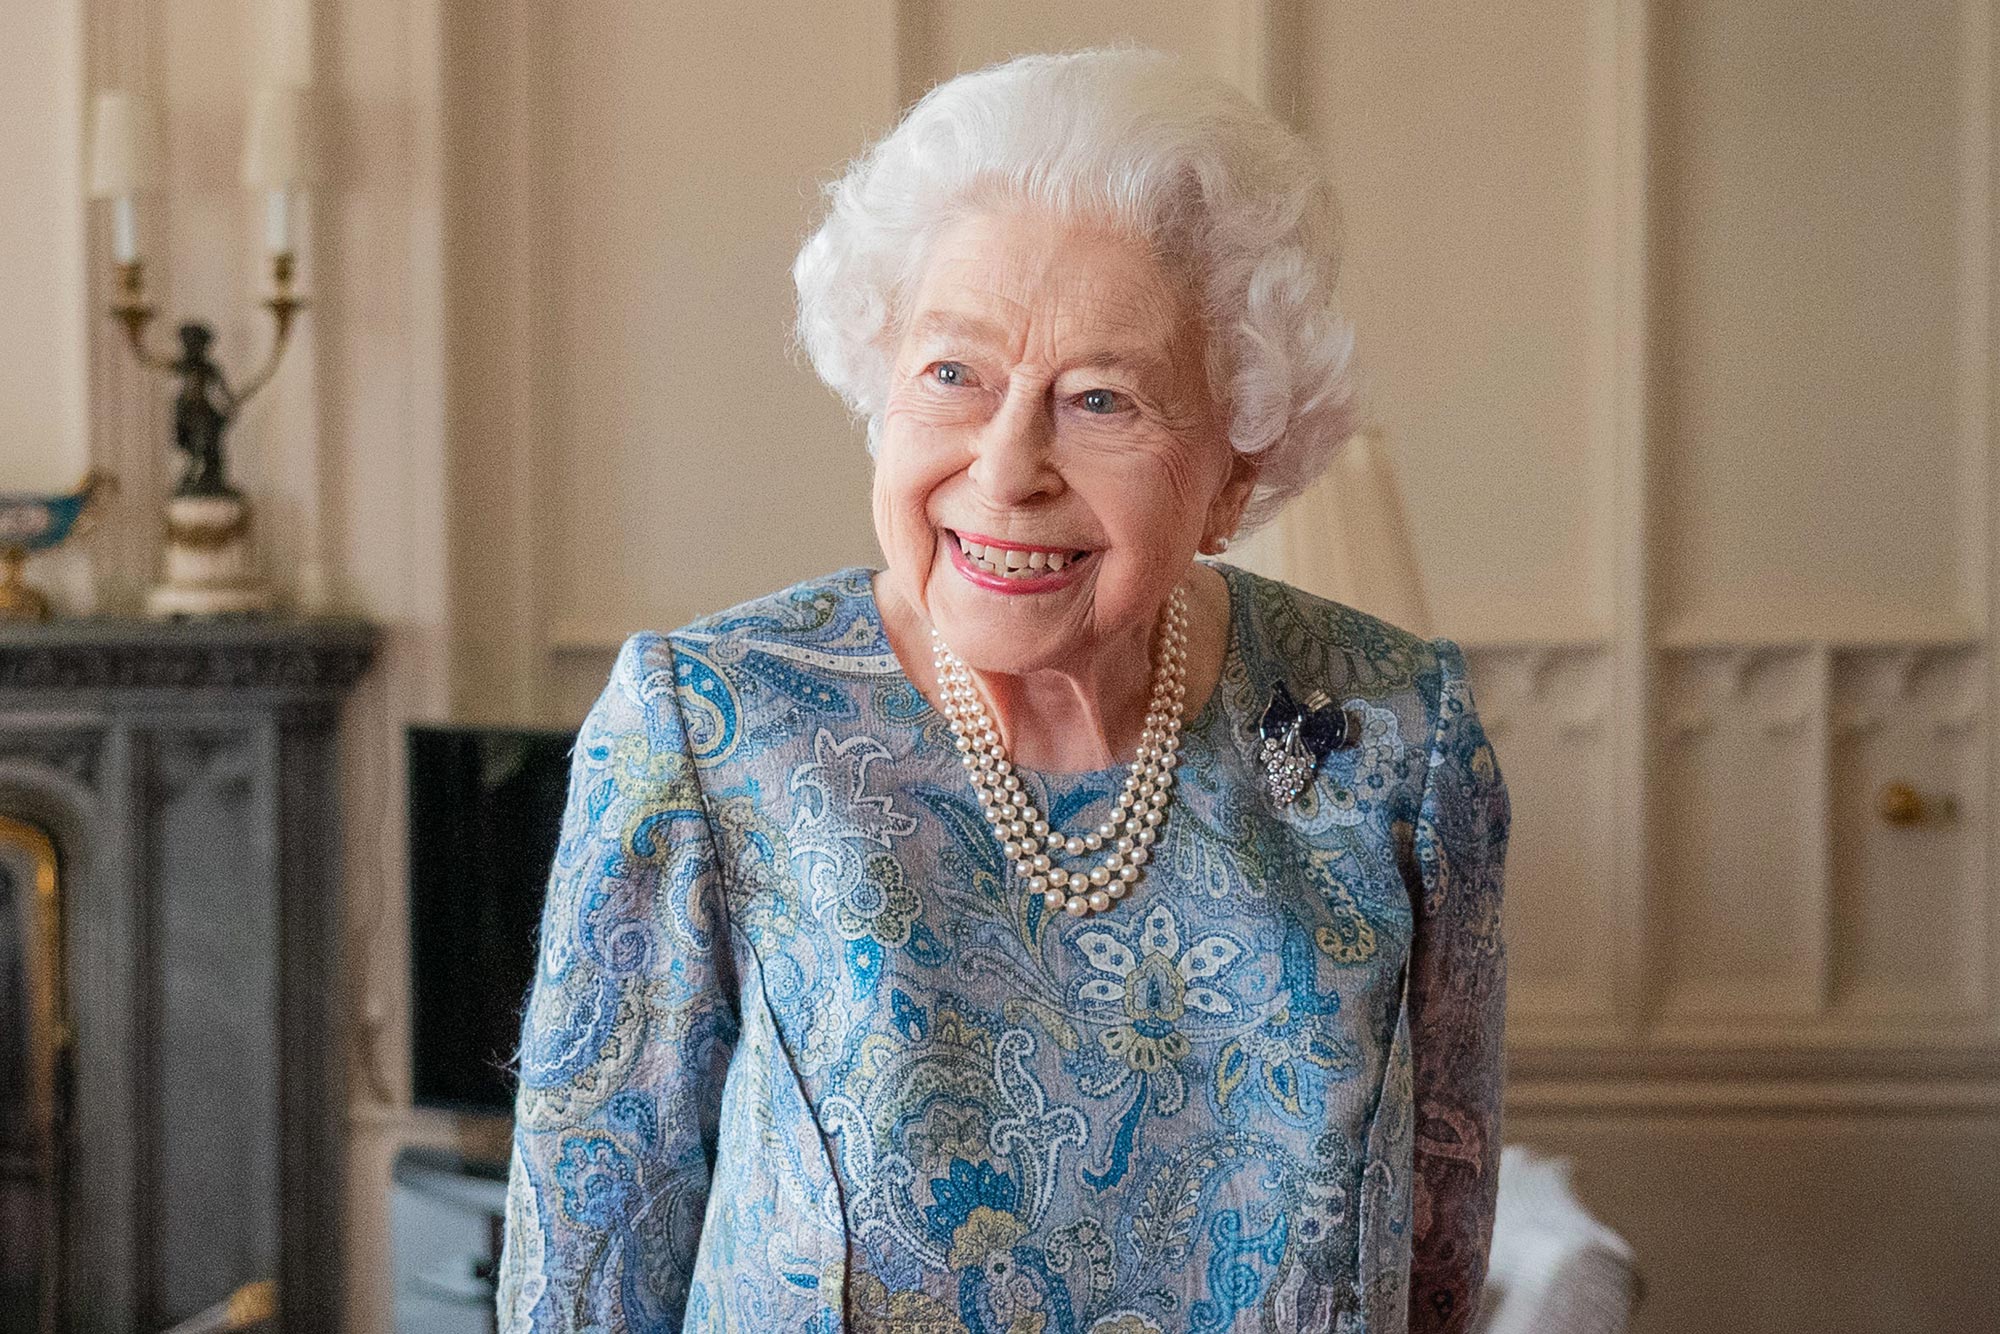 1394204506 WINDSOR, ENGLAND - APRIL 28: Queen Elizabeth II attends an audience with the President of Switzerland Ignazio Cassis (Not pictured) at Windsor Castle on April 28, 2022 in Windsor, England. (Photo by Dominic Lipinski - WPA Pool/Getty Images)